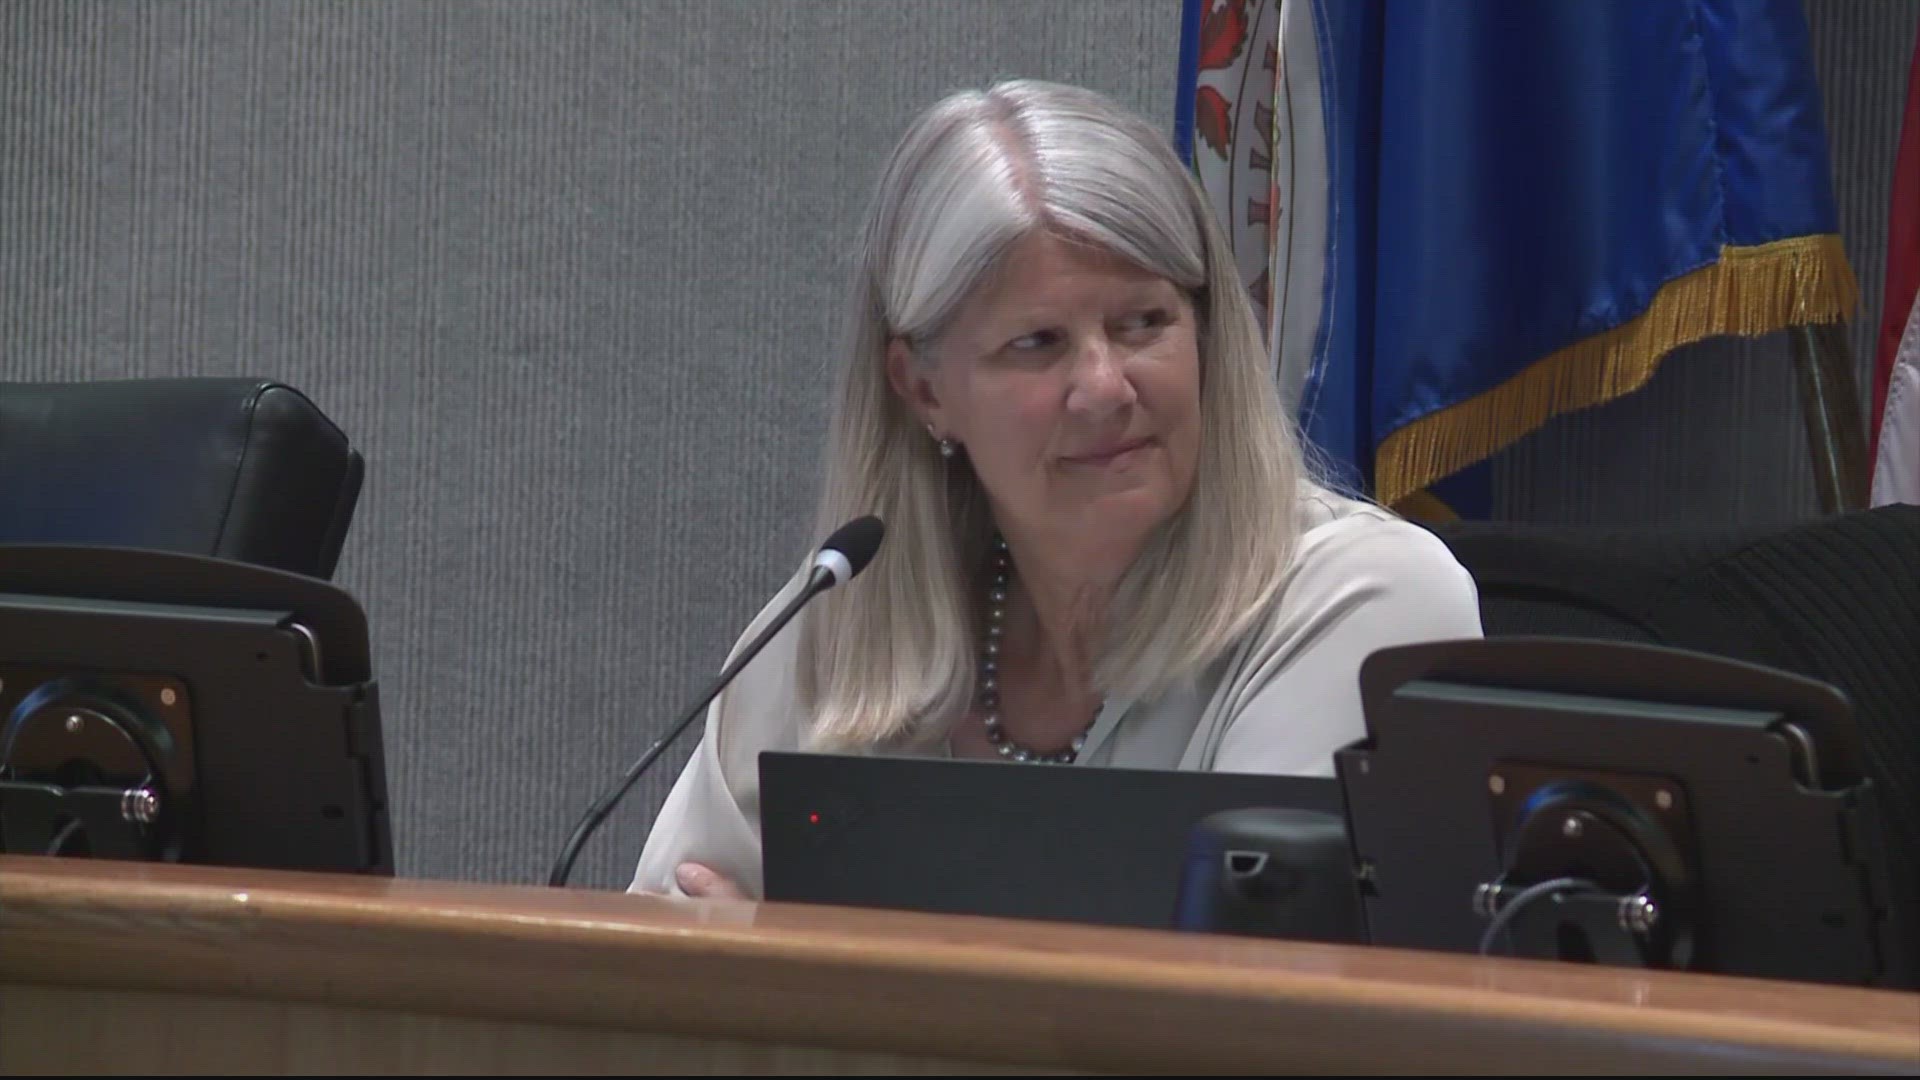 A resolution proposed by Supervisor Jeanine Lawson wants the board to hold off on land-use decisions until new members are sworn in.